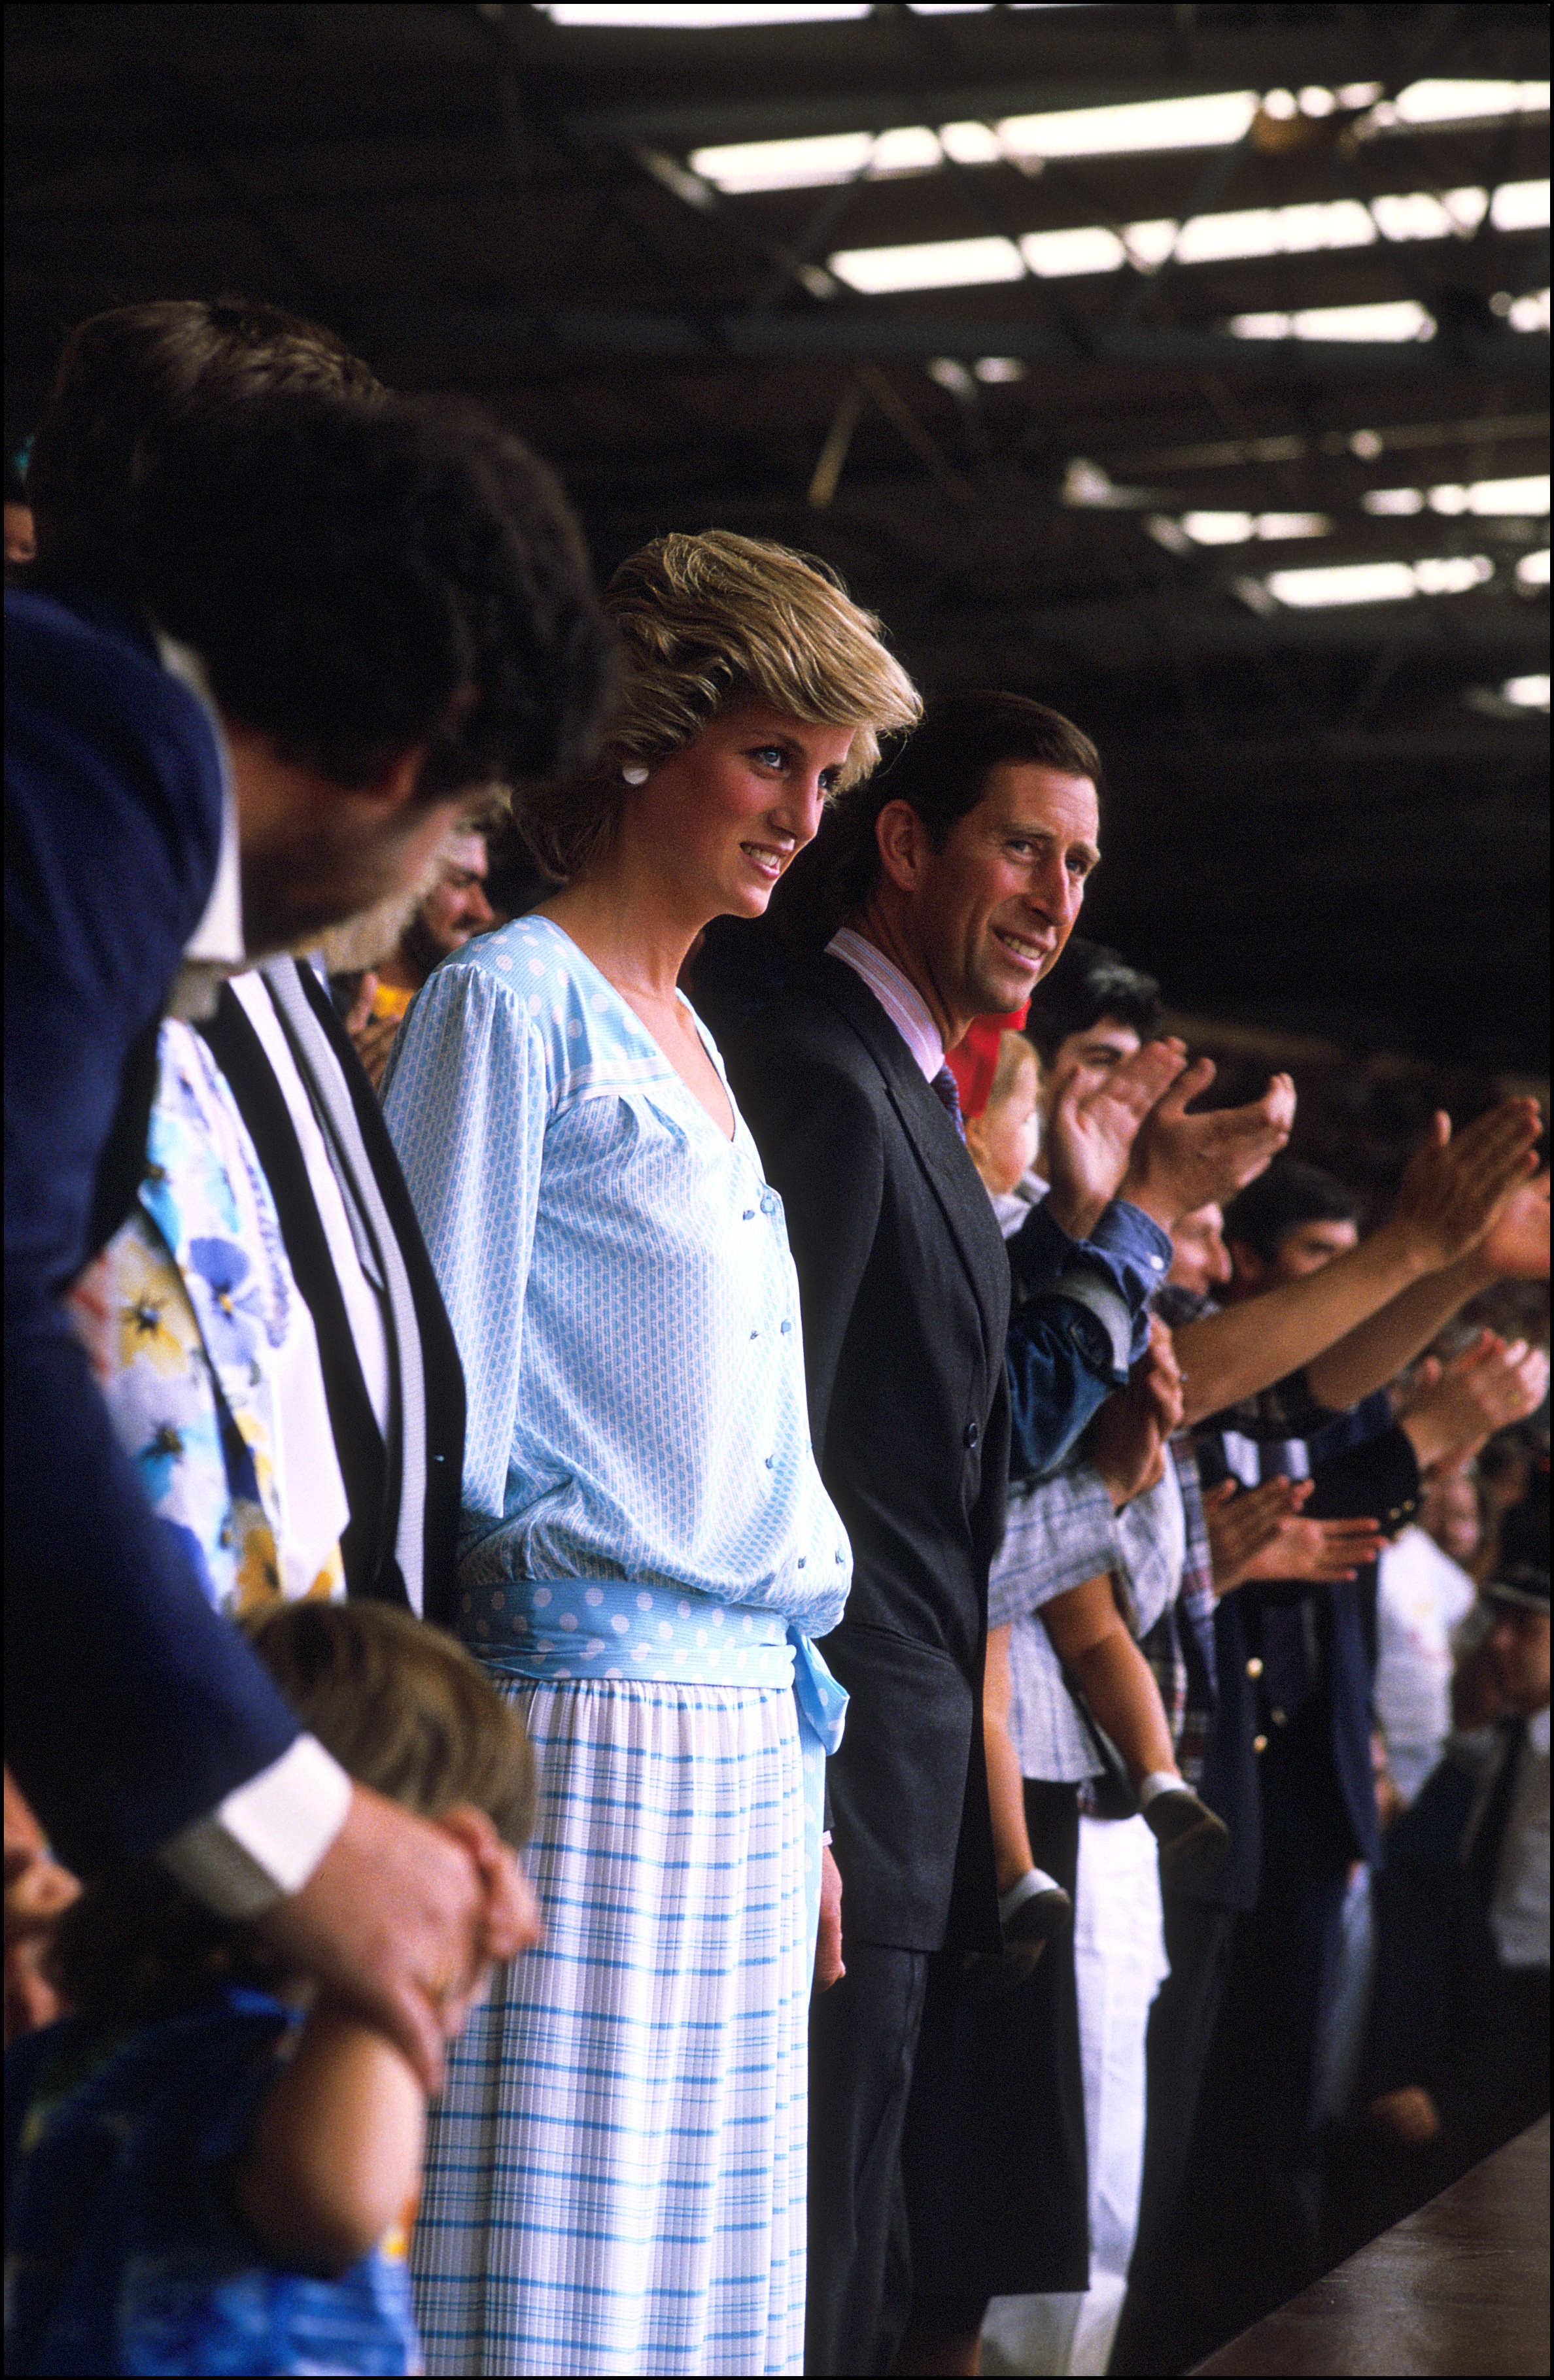 Prince Charles and Princess Diana, wearing a Kanga dress, at the Live Aid concert at Wembley Stadium on July 13, 1985 in London, England | Source: Getty Images